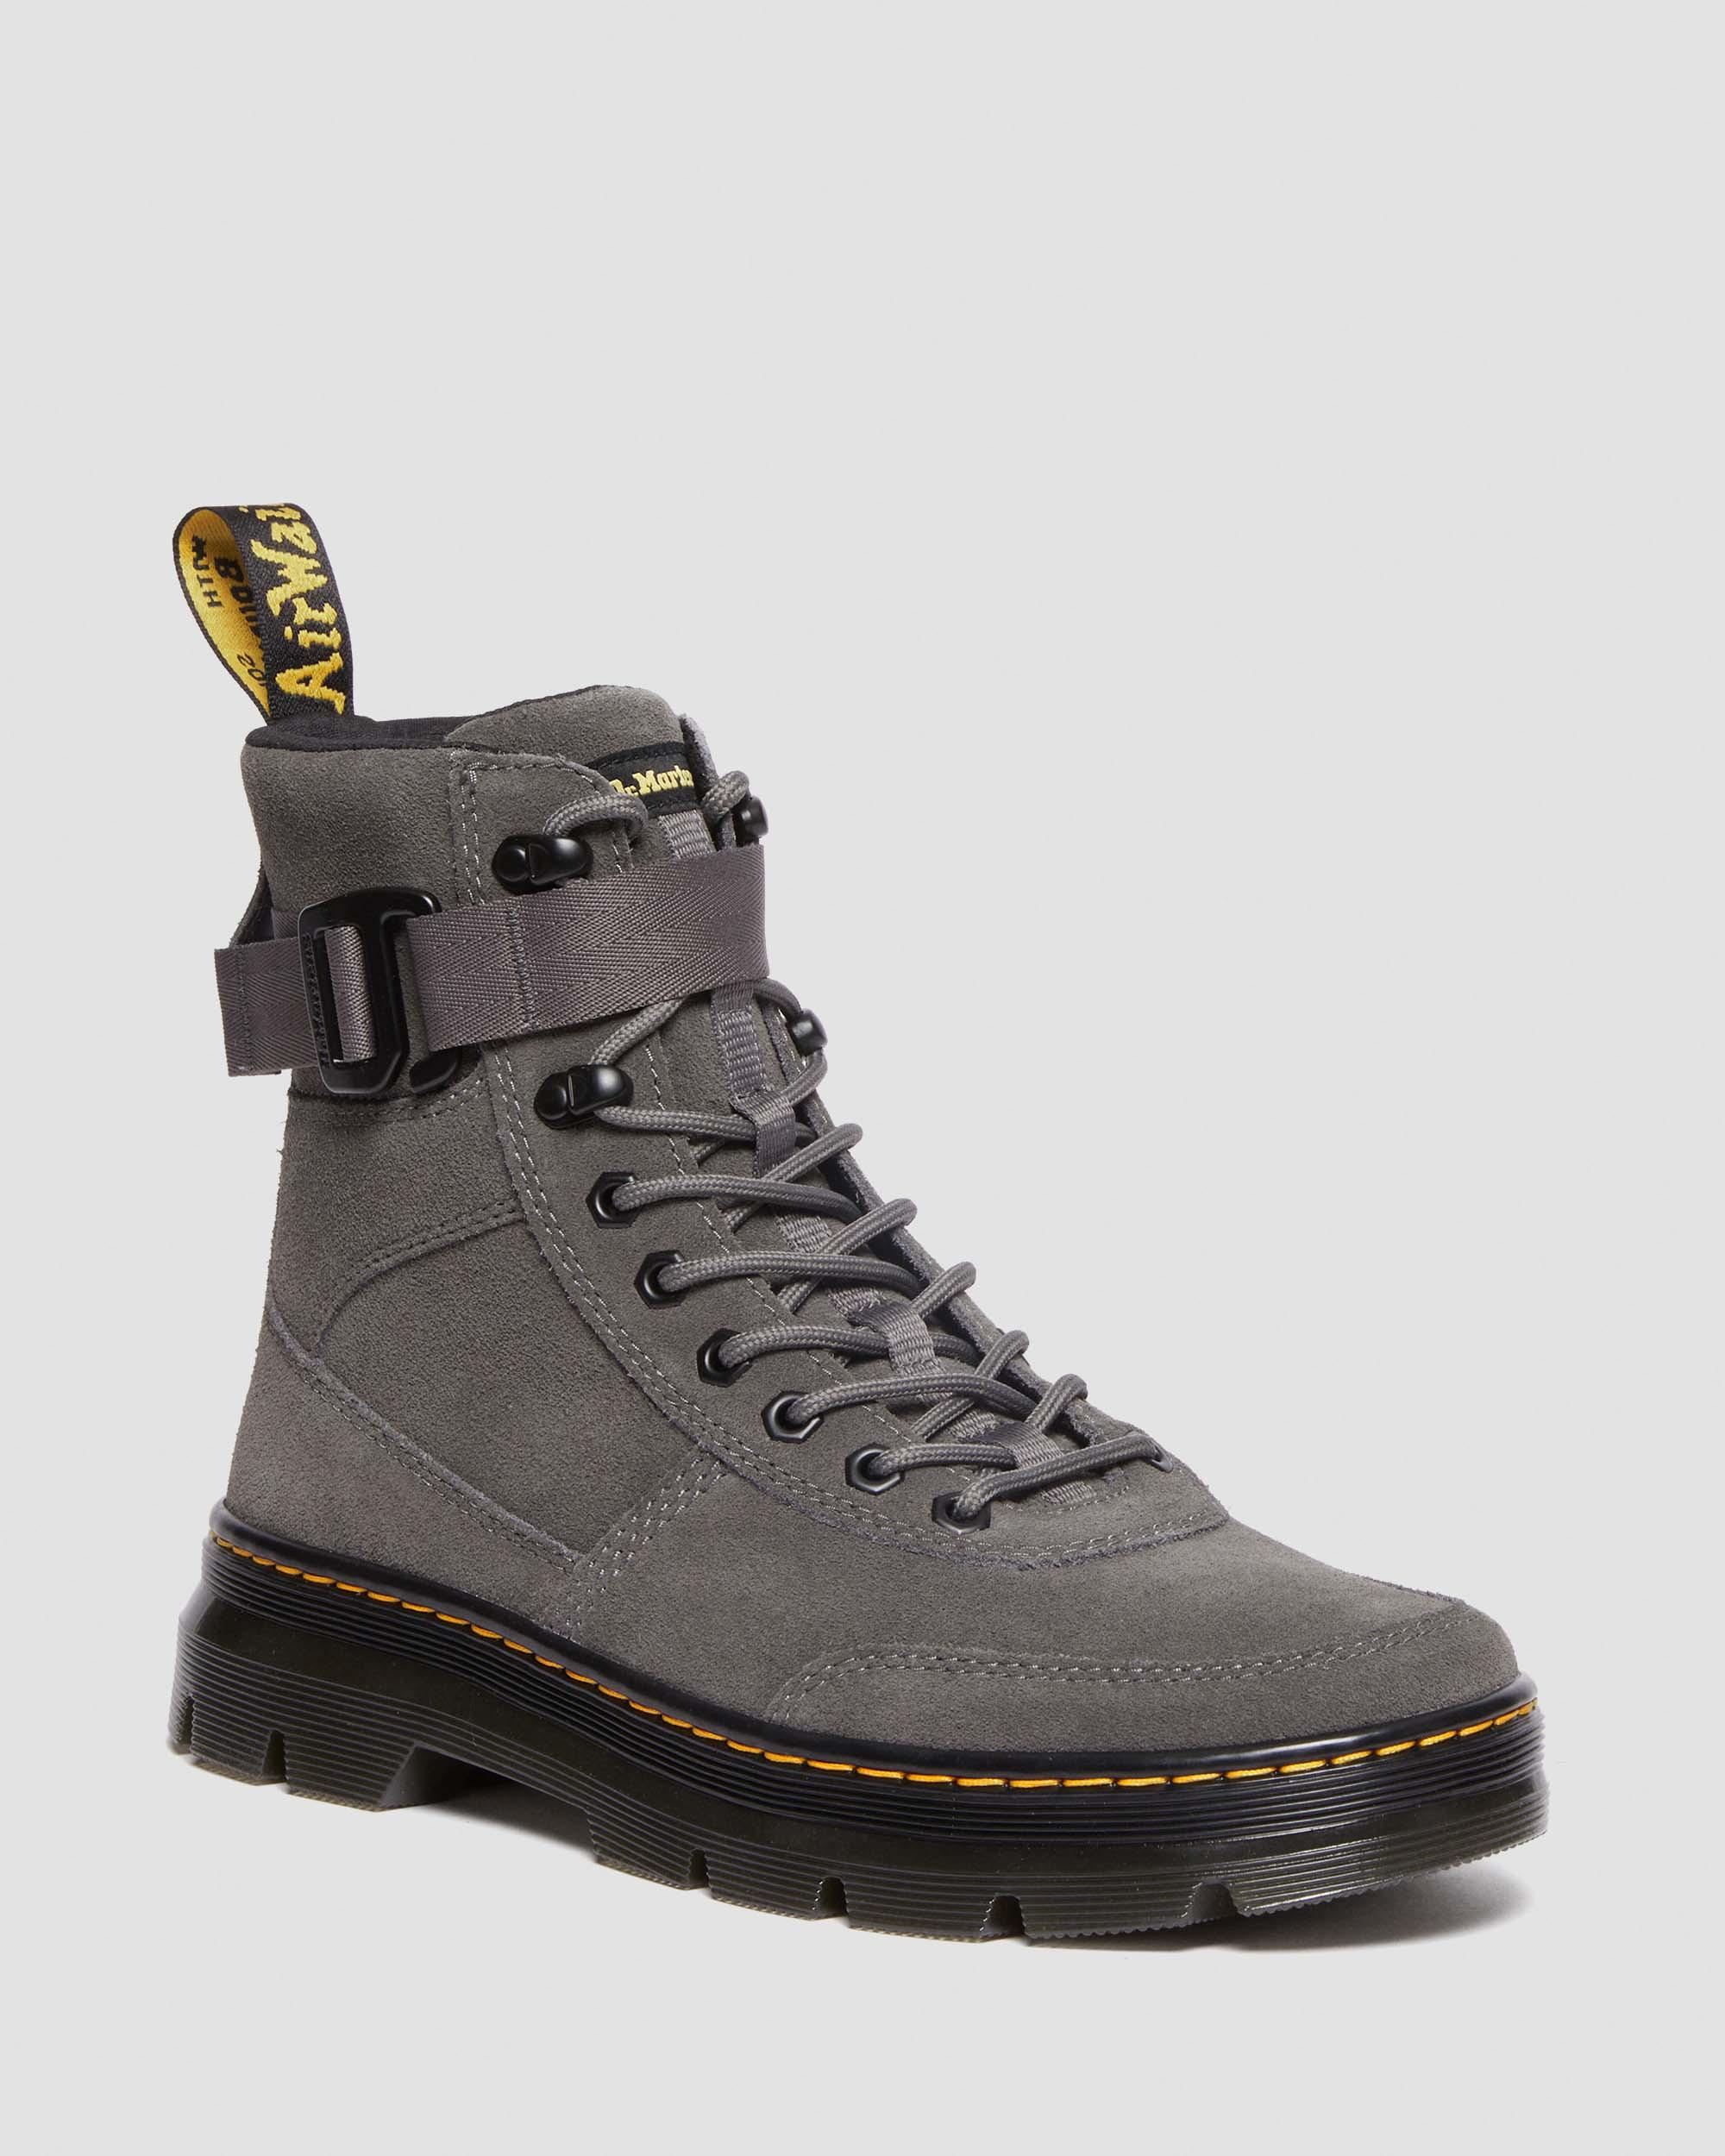 Combs Tech Suede Casual Boots in Gunmetal | Dr. Martens